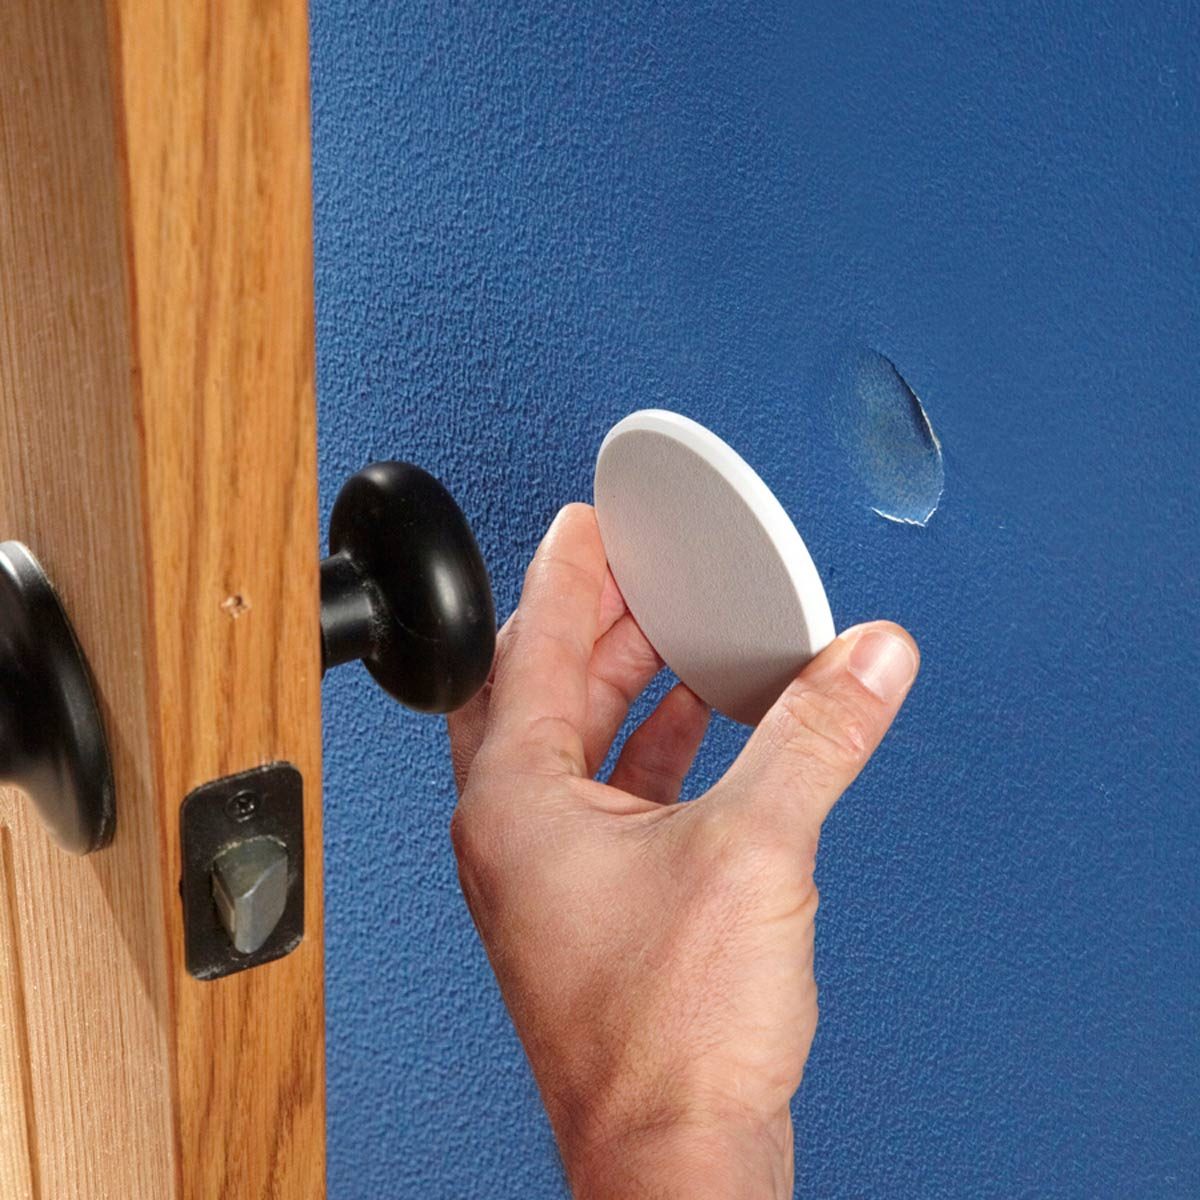 The 14 Best Fixes For Annoying Sights in Your Home